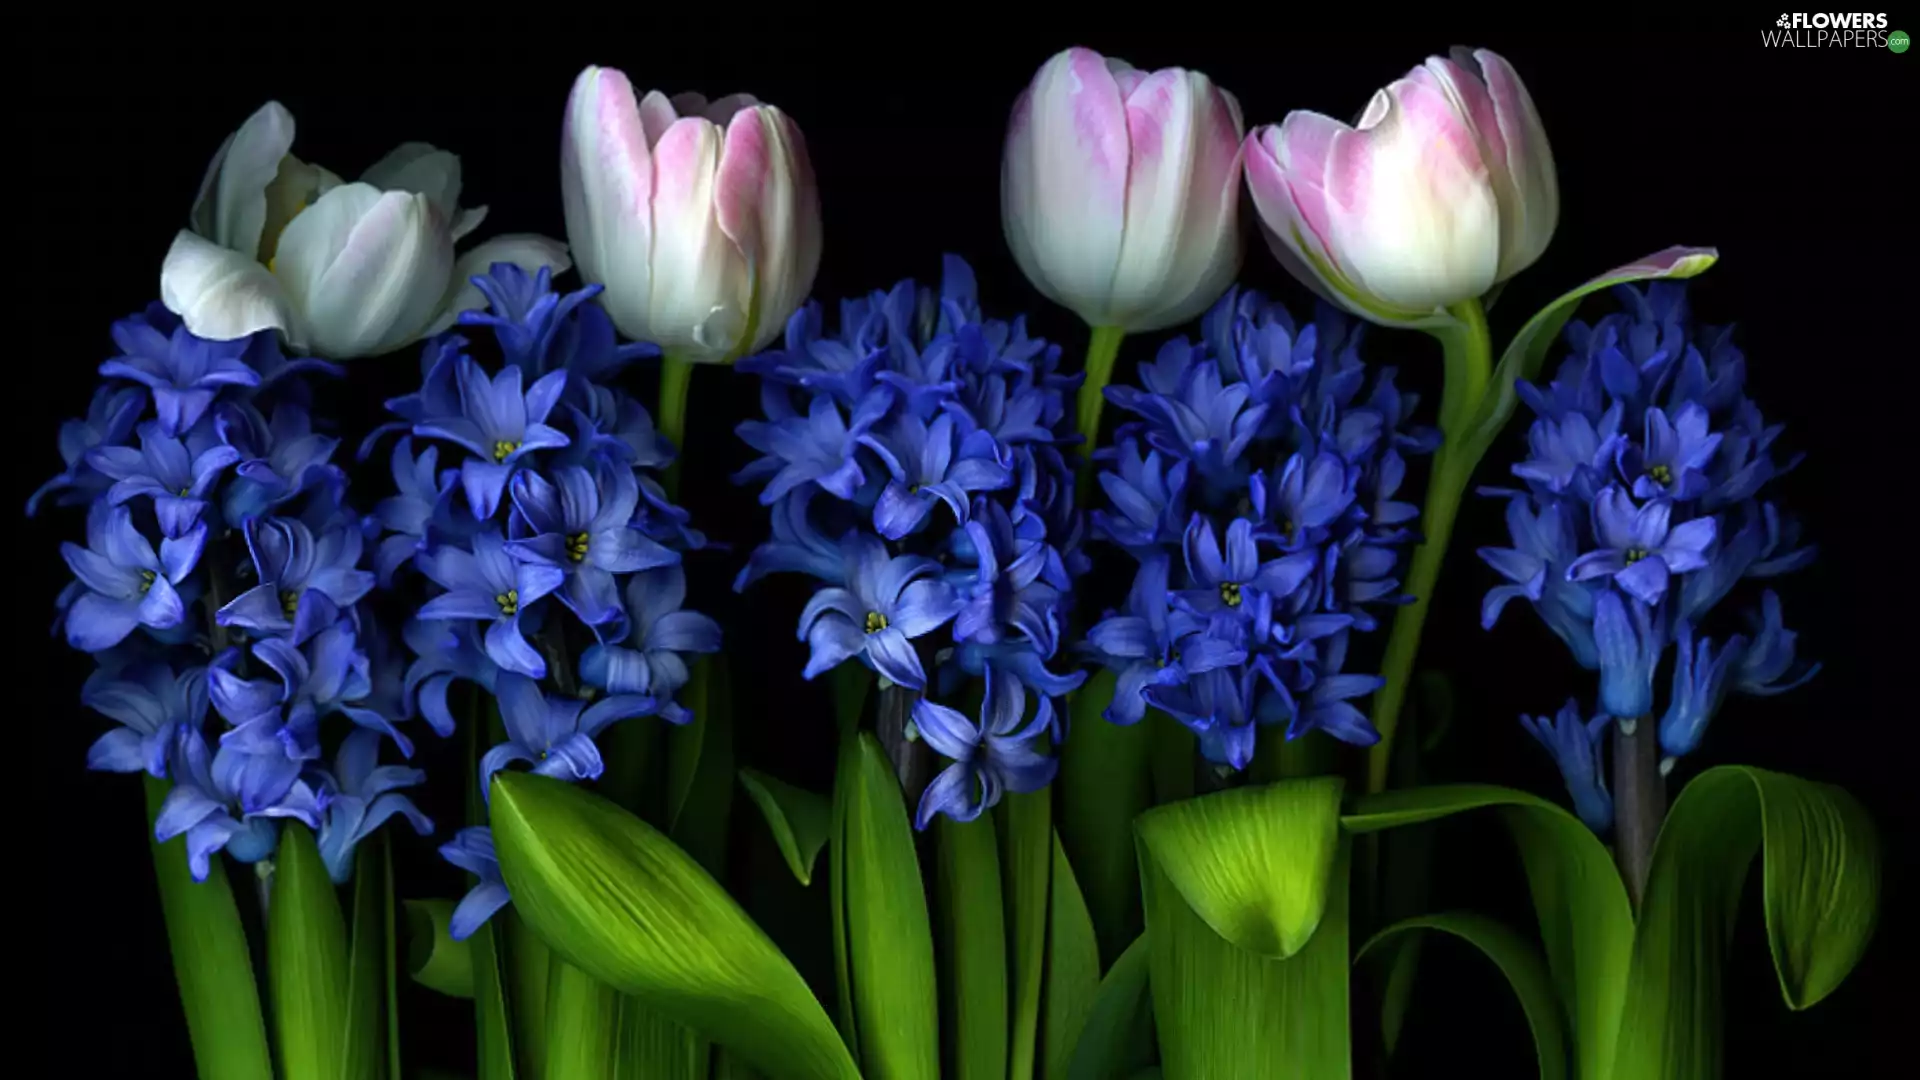 Tulips, Hyacinths - Flowers wallpapers: 1920x1080